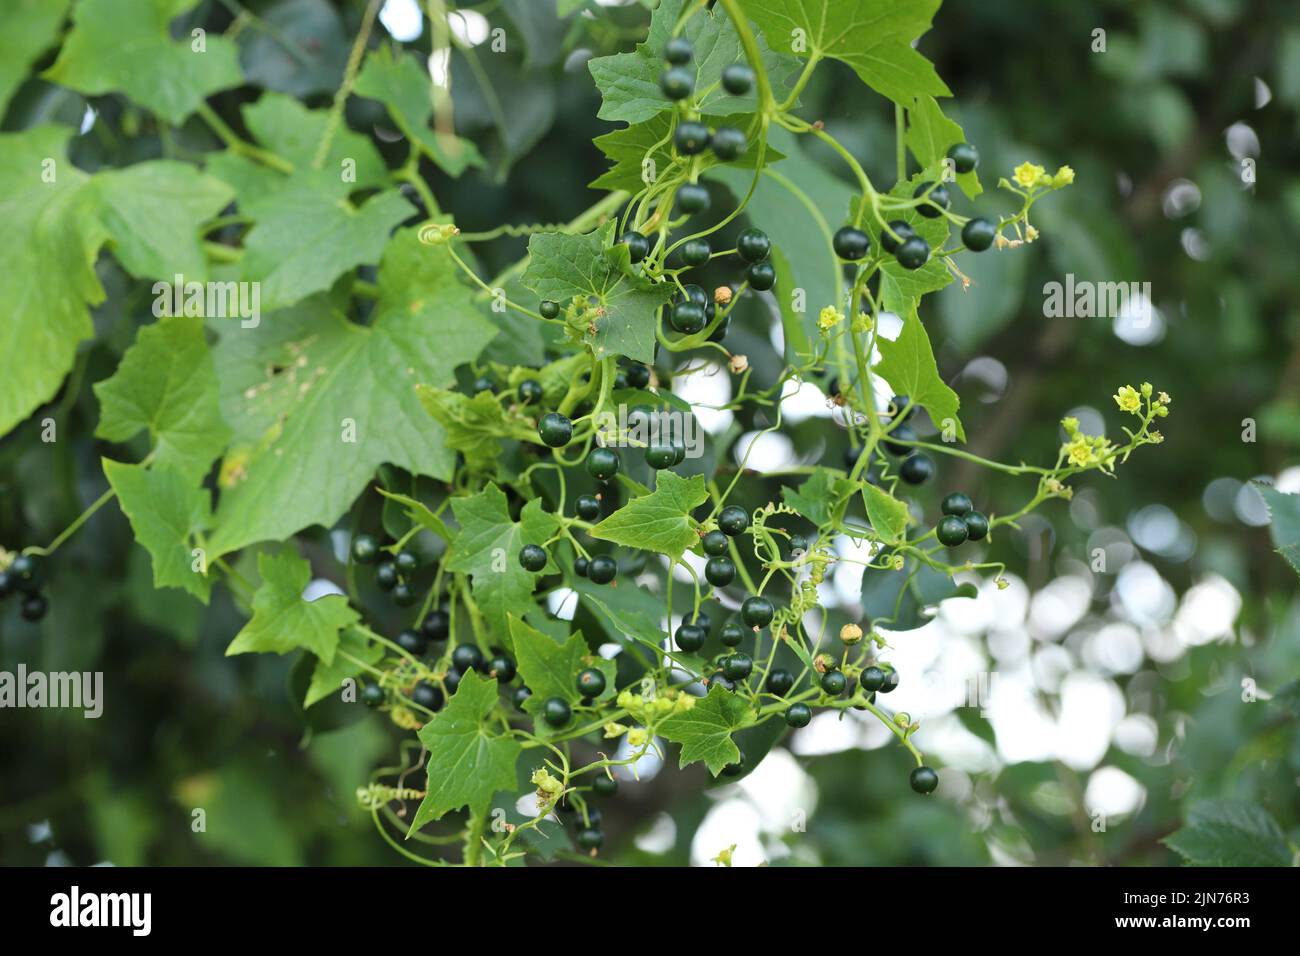 Creeper plant Bryonia alba at the time of fruiting. flowers of a white bryony a climbing, poisonous plant. Stock Photo